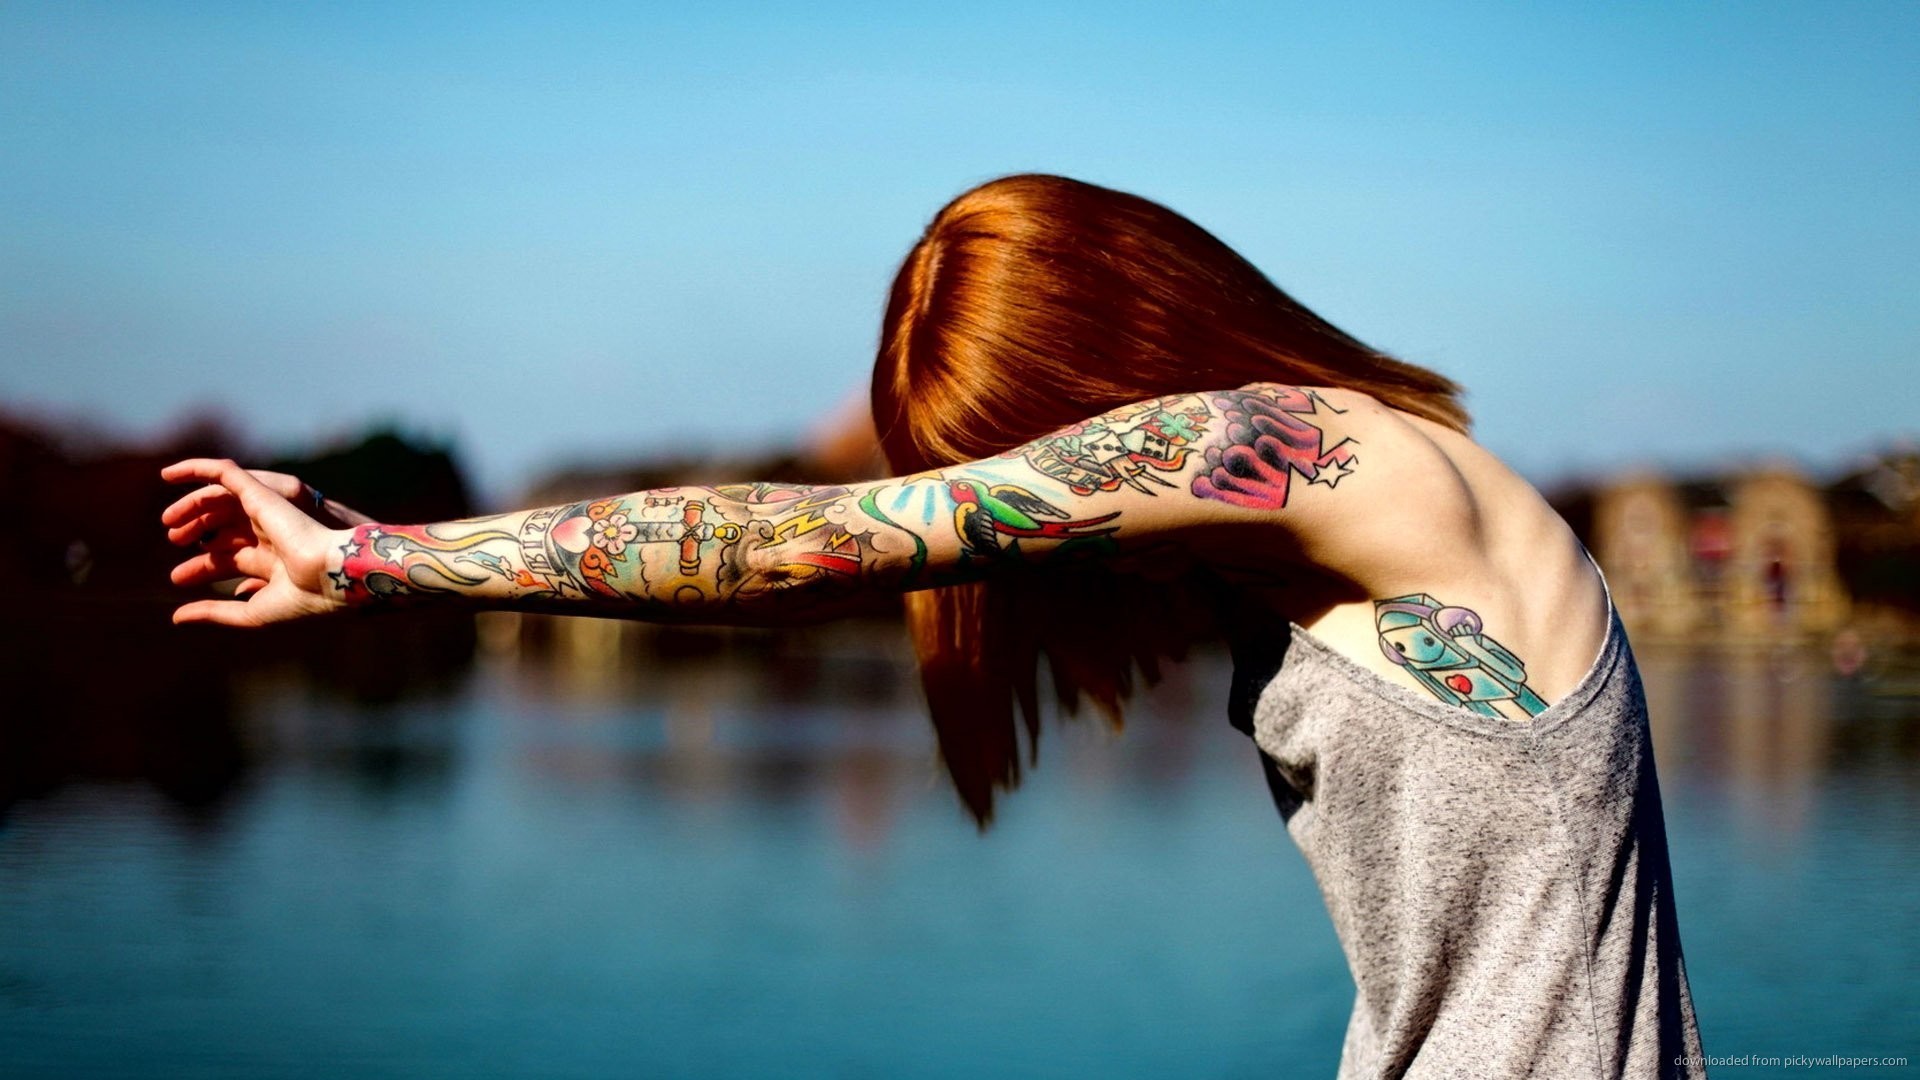 1920x1080 Red girl with colorful tattoos picture